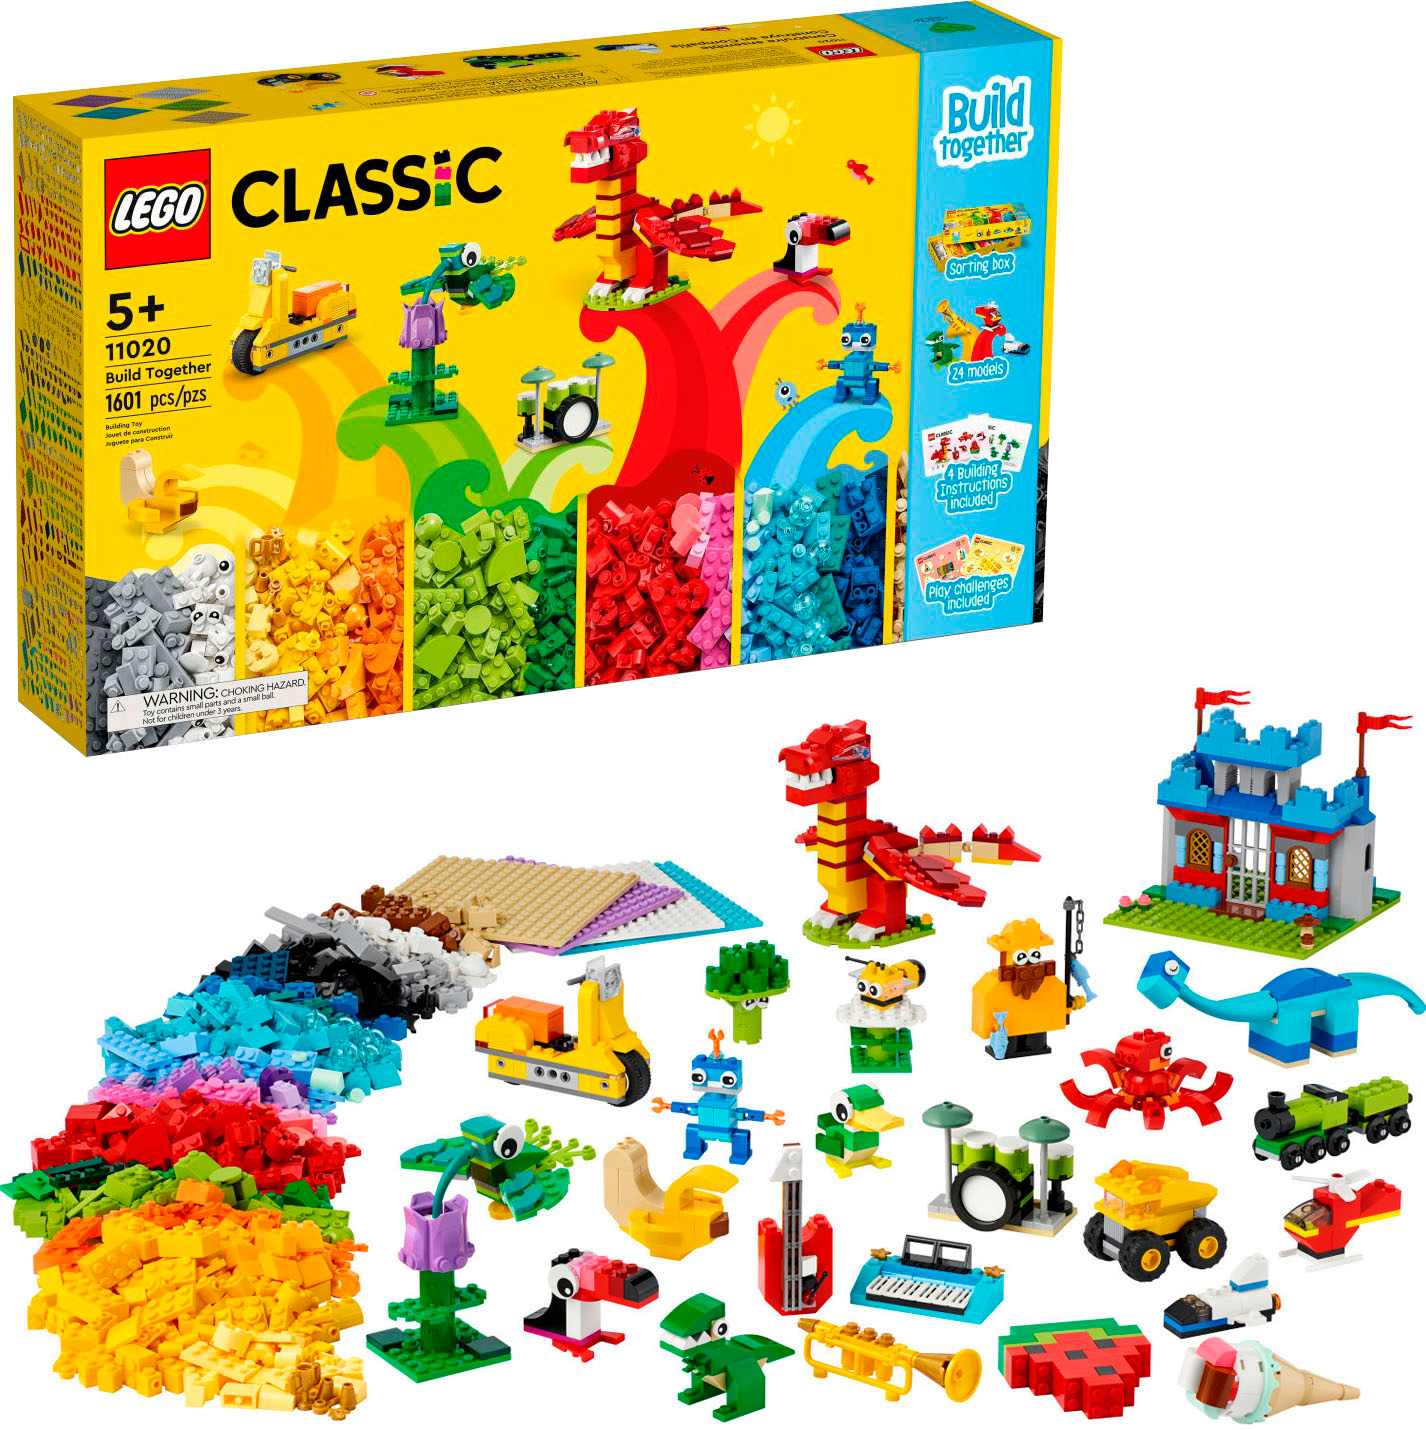 LEGO Classic Build Together 11020 6379804 - Best Buy